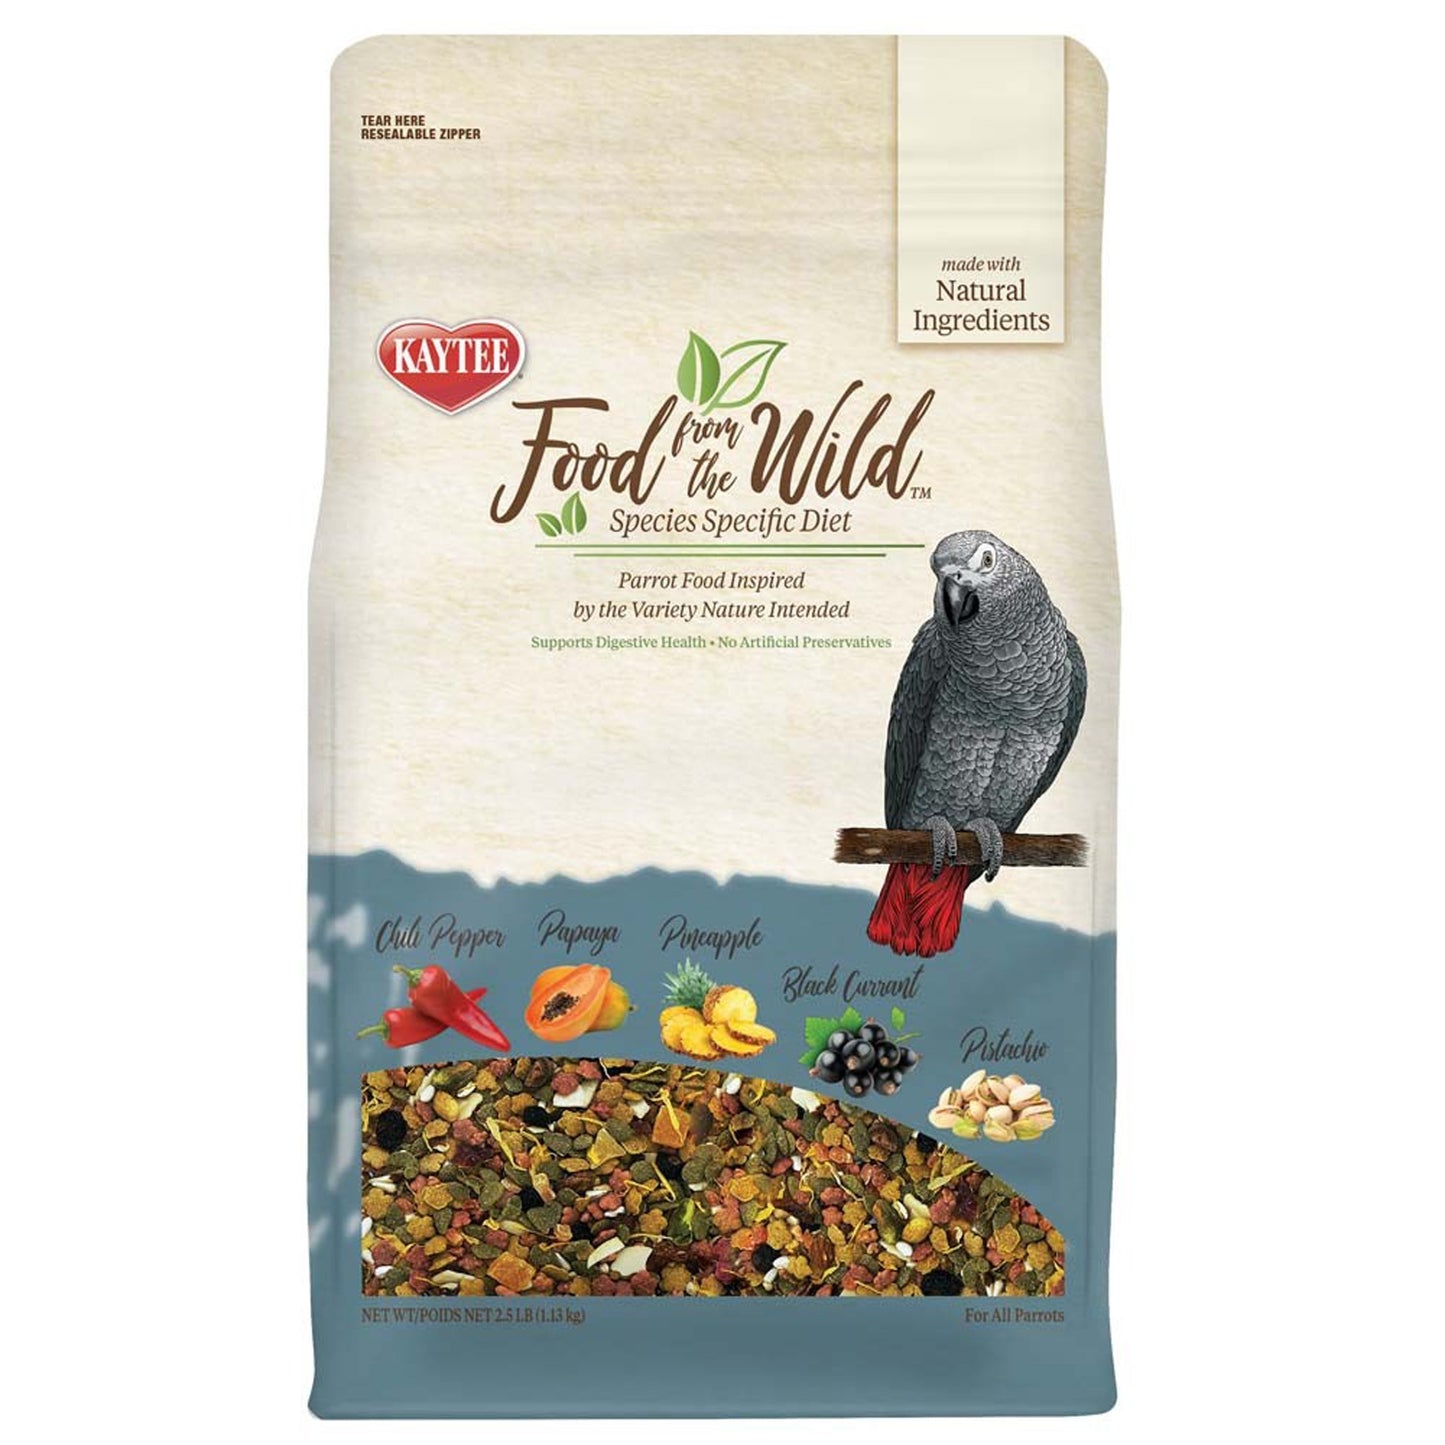 Kaytee Food from the Wild Parrot 1ea/2.5 lb